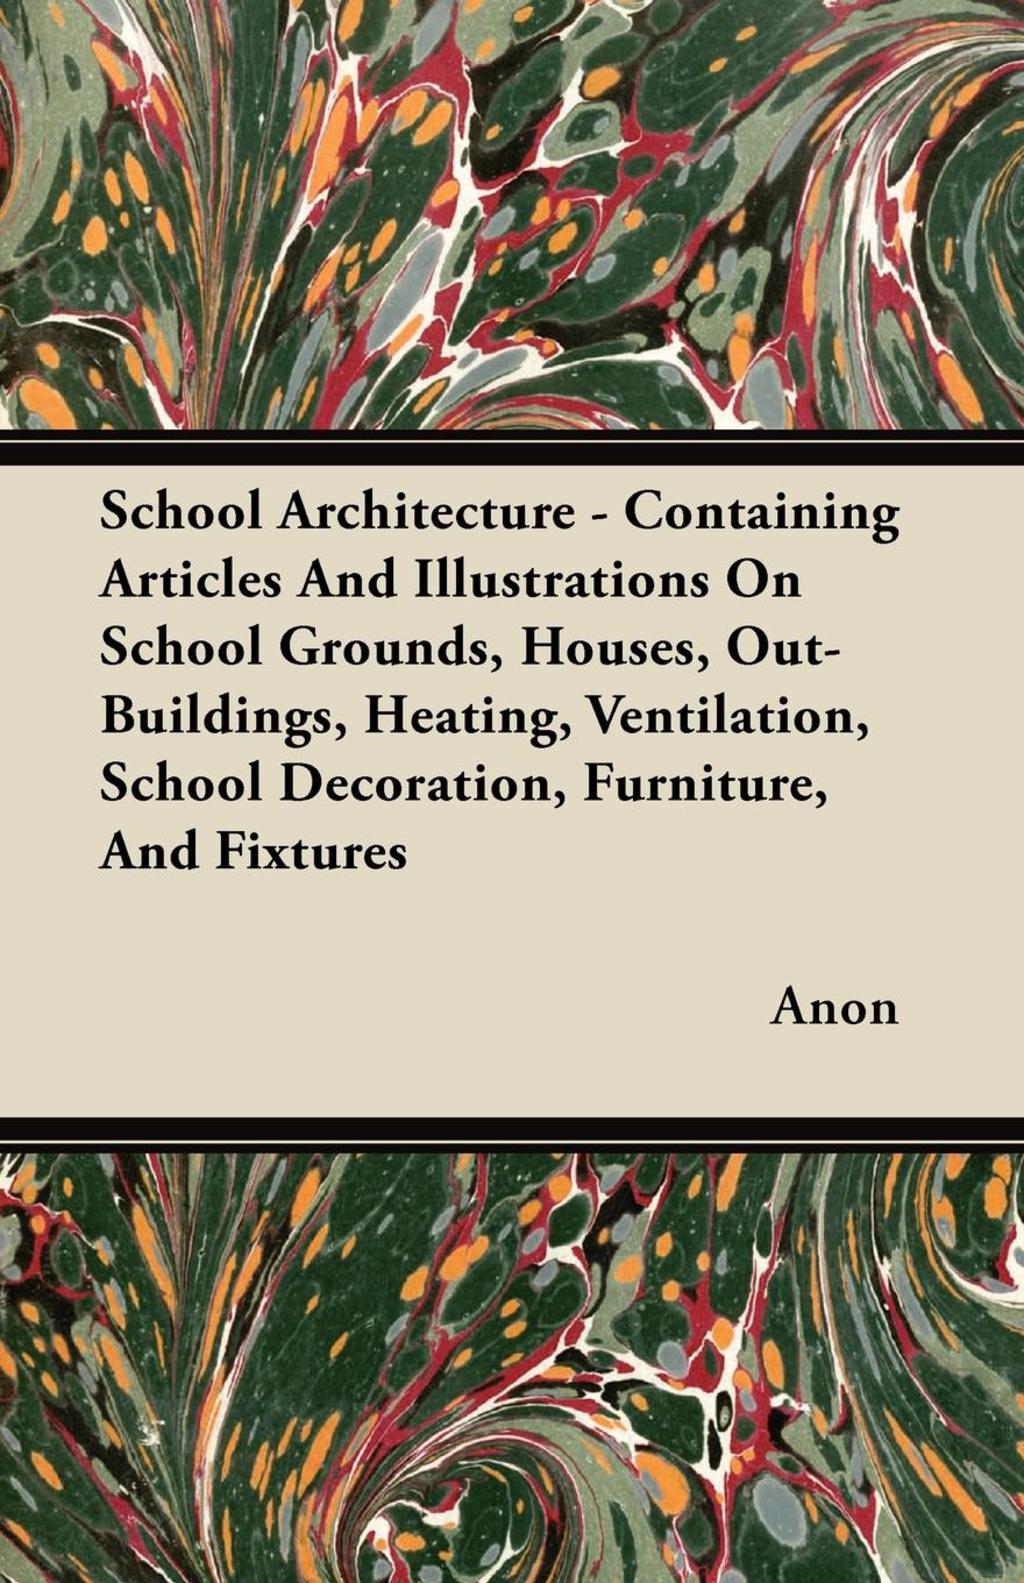 School Architecture - Containing Articles And Illustrations On School Grounds  Houses  Out-Buildings  Heating  Ventilatio (eBook) - Anon,